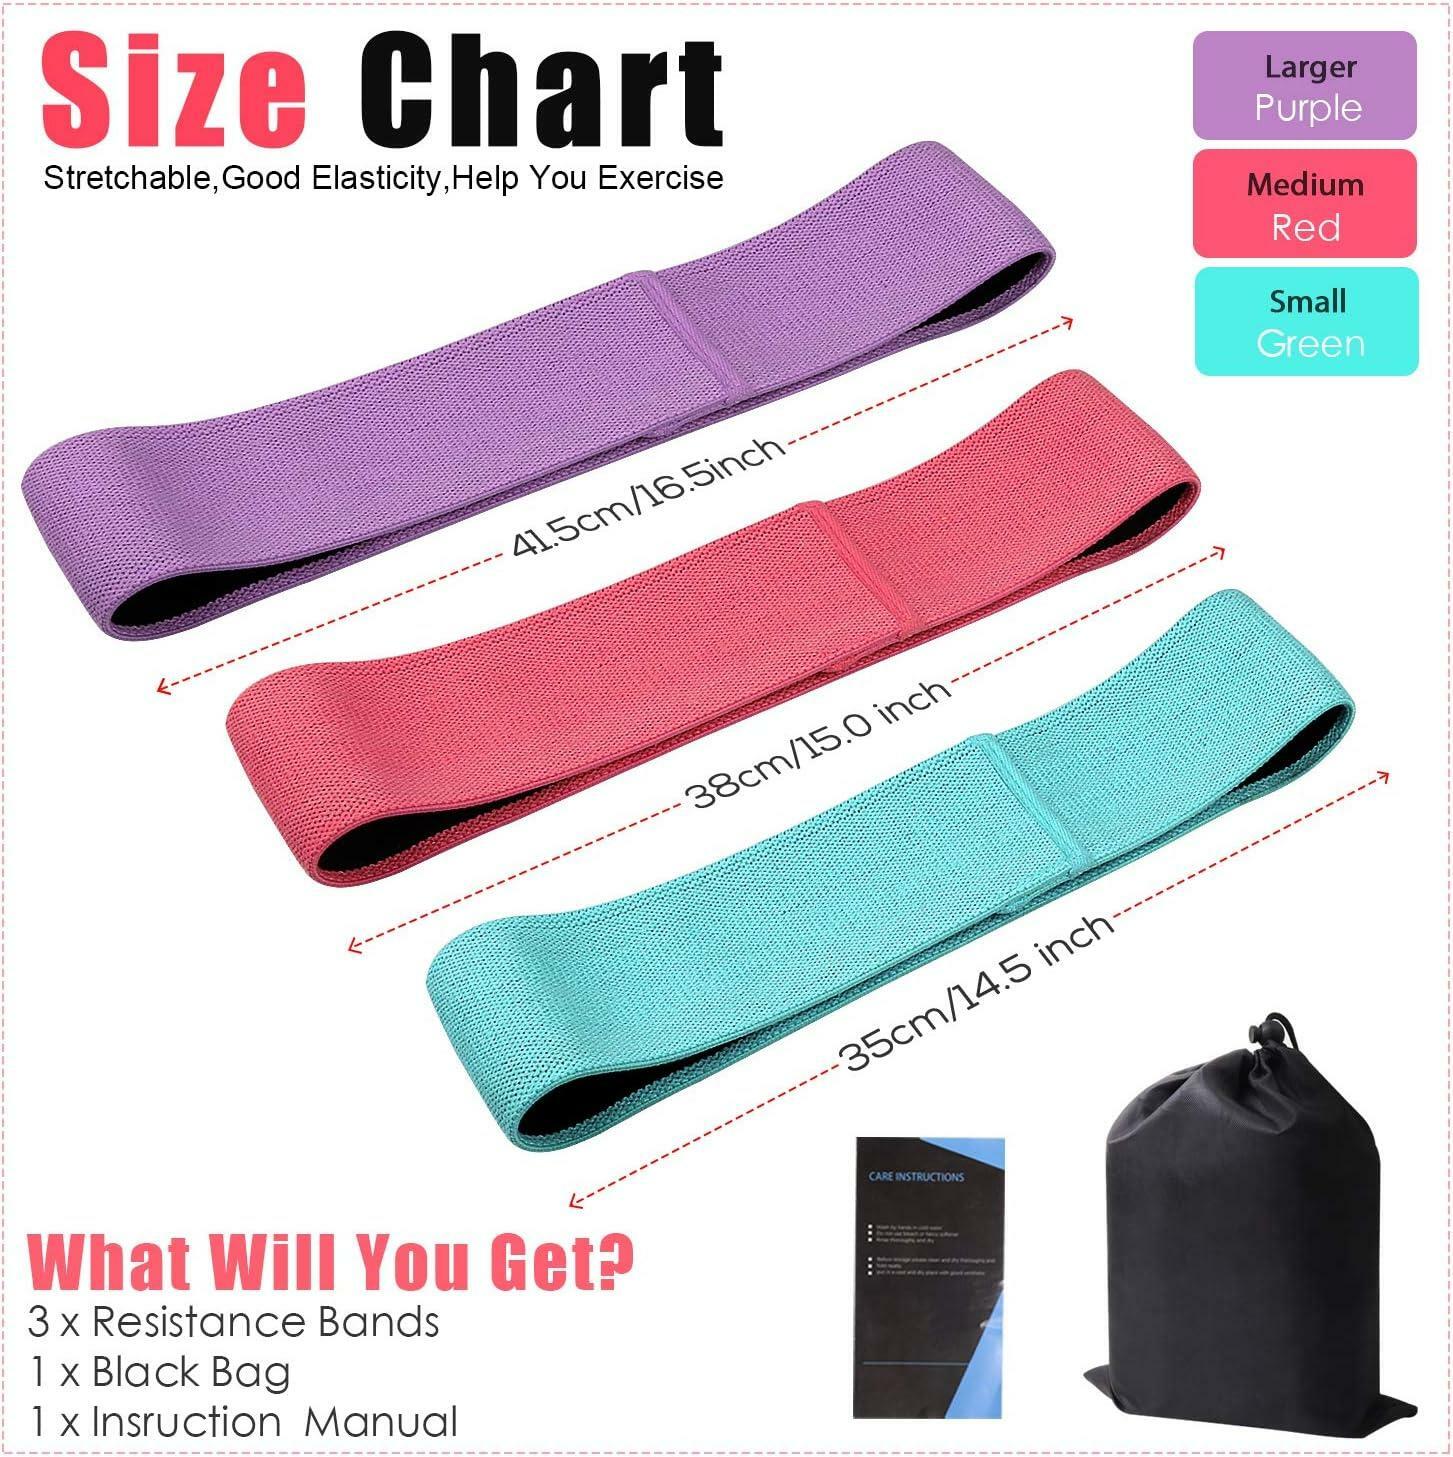 Resistance Bands for Legs and Butt, Exercise Bands Booty Bands Hip Bands Wide Workout Bands Sports-Fitness Bands Stretch Resistance Loops Band Anti Slip Elastic (Set of 3) - Opticdeals